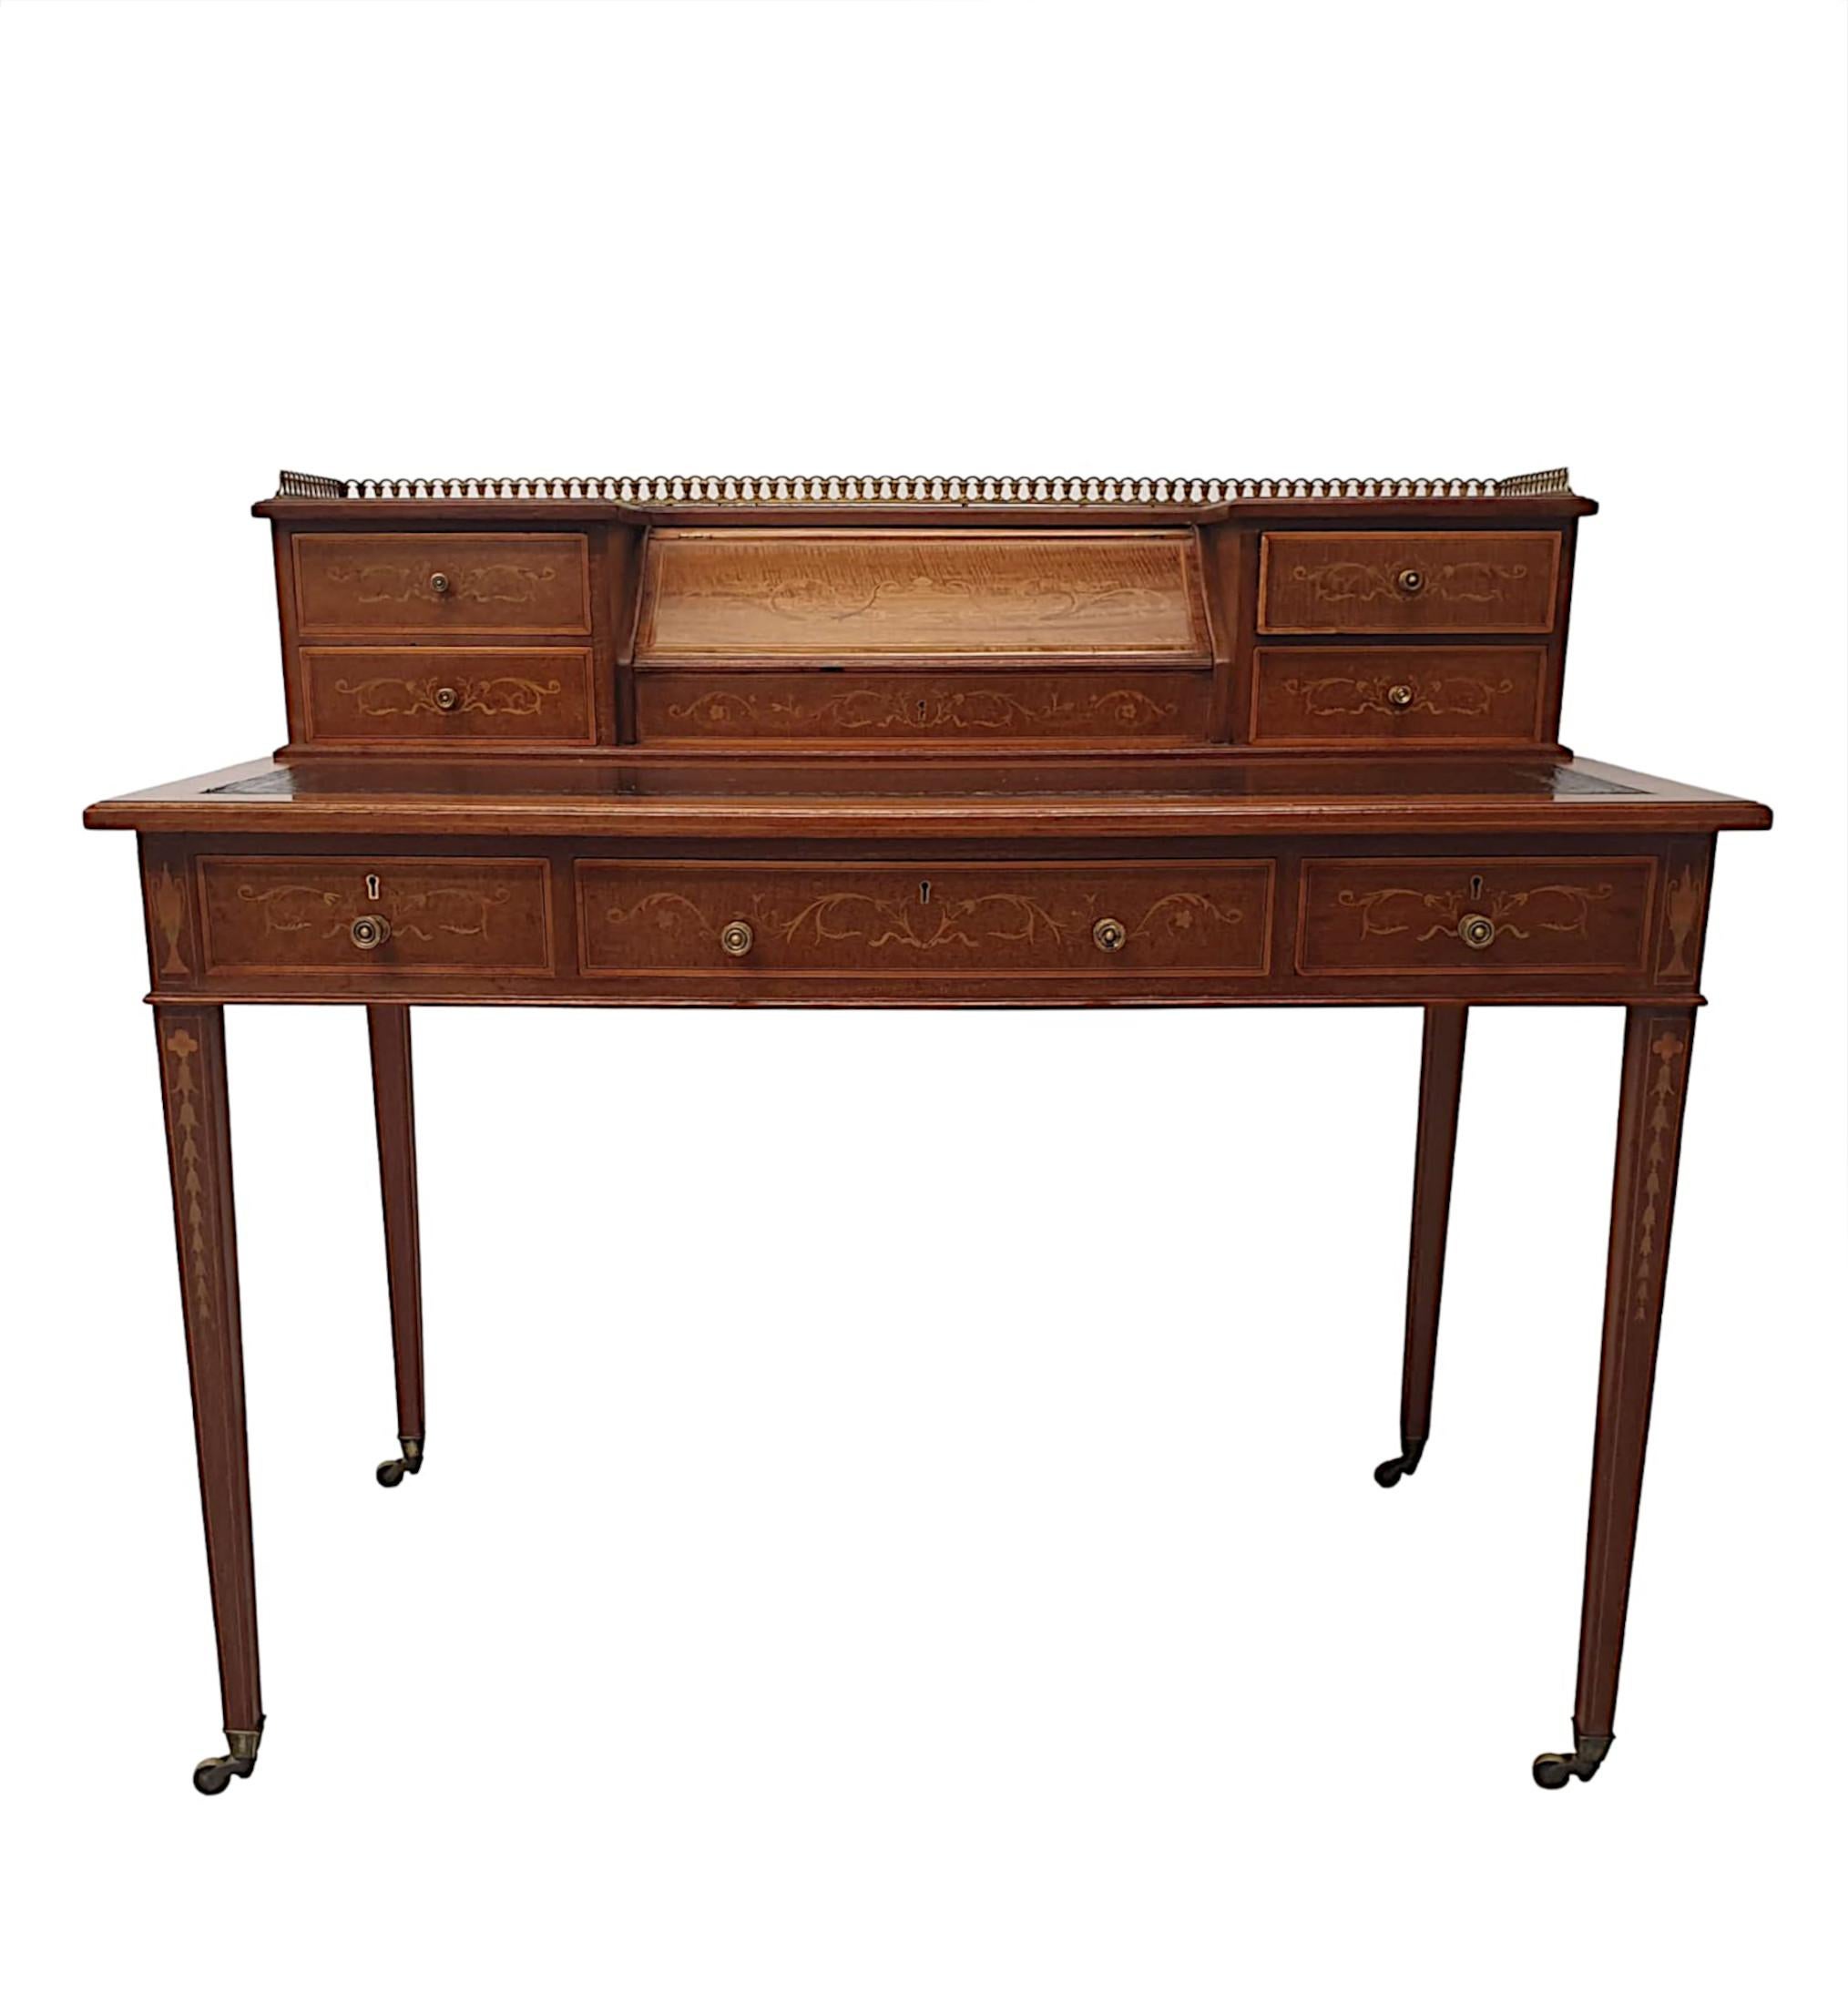 Very Fine Edwardian Desk Attributed to Edward and Roberts For Sale 2